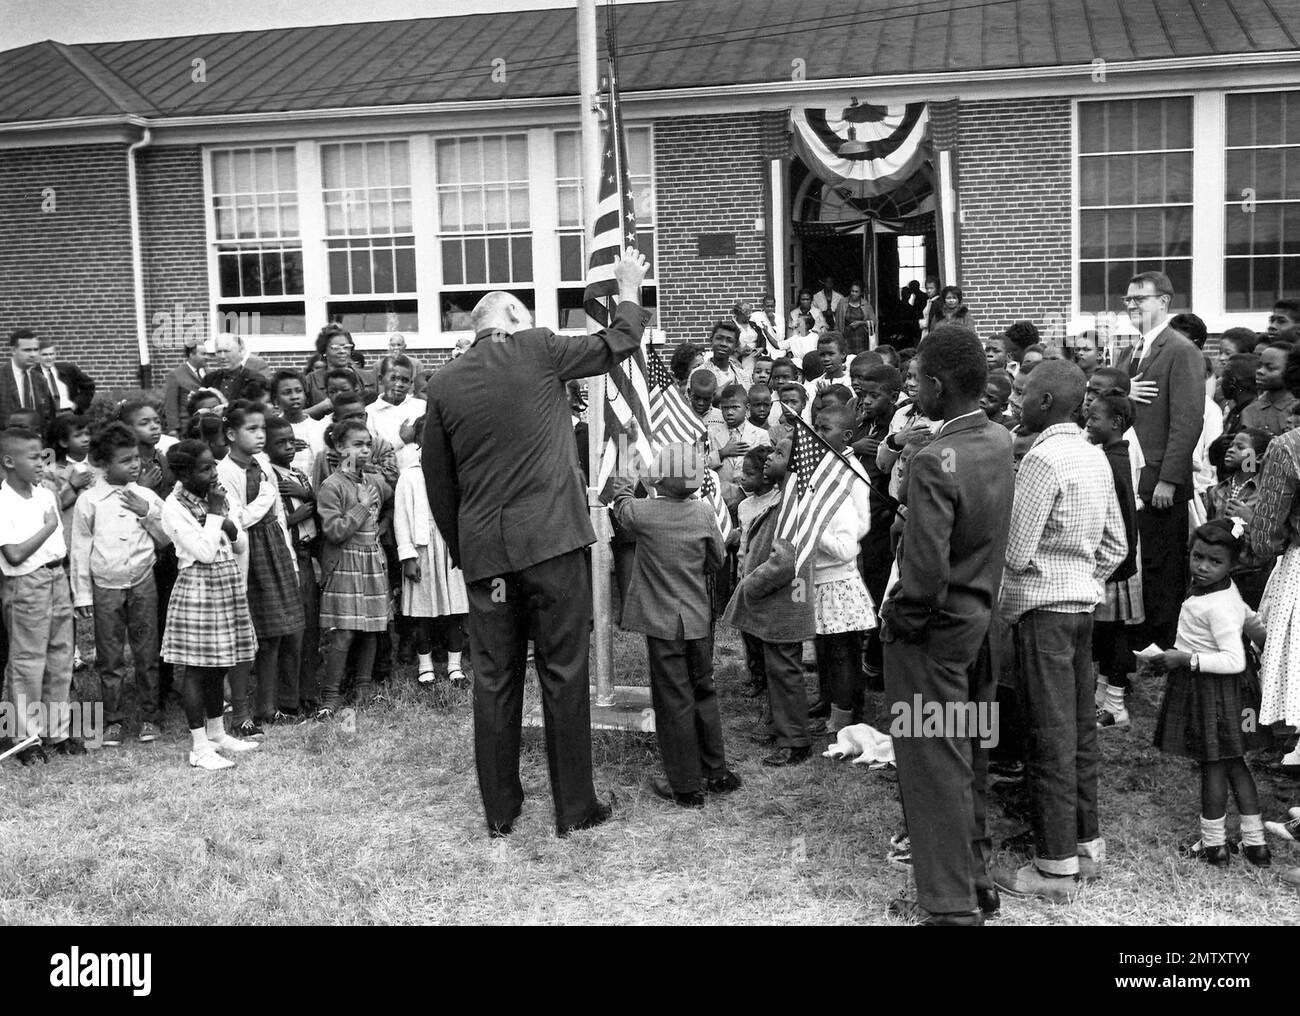 An elementary school student raises the flag at Mary E. Branch No. 2 Free School during opening ceremonies in Farmville, Va., Sept. 16, 1963. The public schools in Prince Edward County have been closed since 1959. At left, Dr. Neil V. Sullivan, superintendent of the Prince Edward Free Schools, watches the proceedings. (AP Photo/Henry Burroughs) Stock Photo